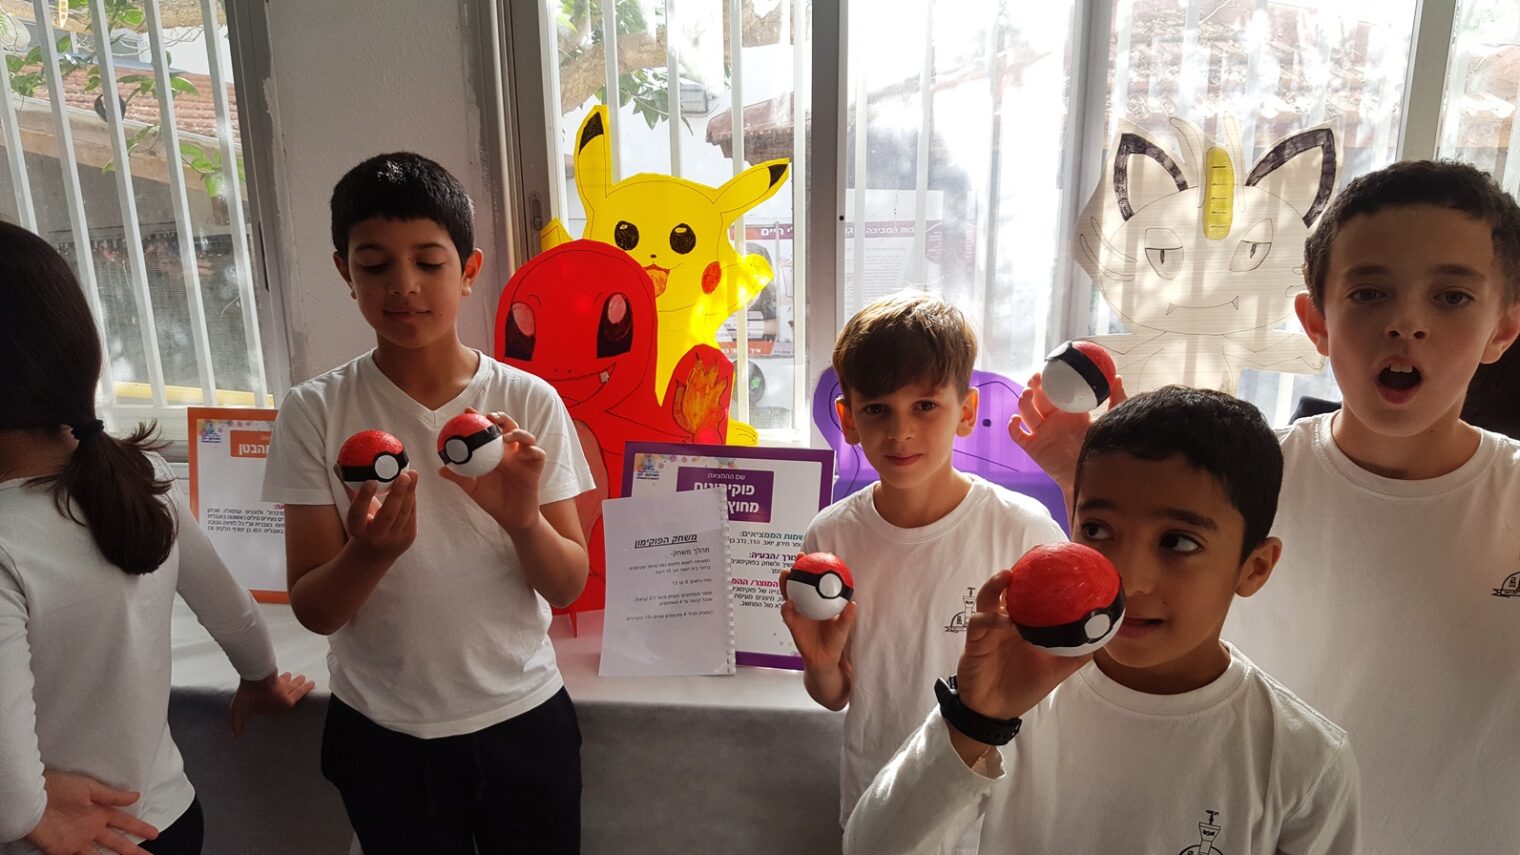 EFK participants at a school in Yavne turned the virtual Pokémon Go game into a real one, dubbed "Pokémons Outside the Web." Photo: courtesy